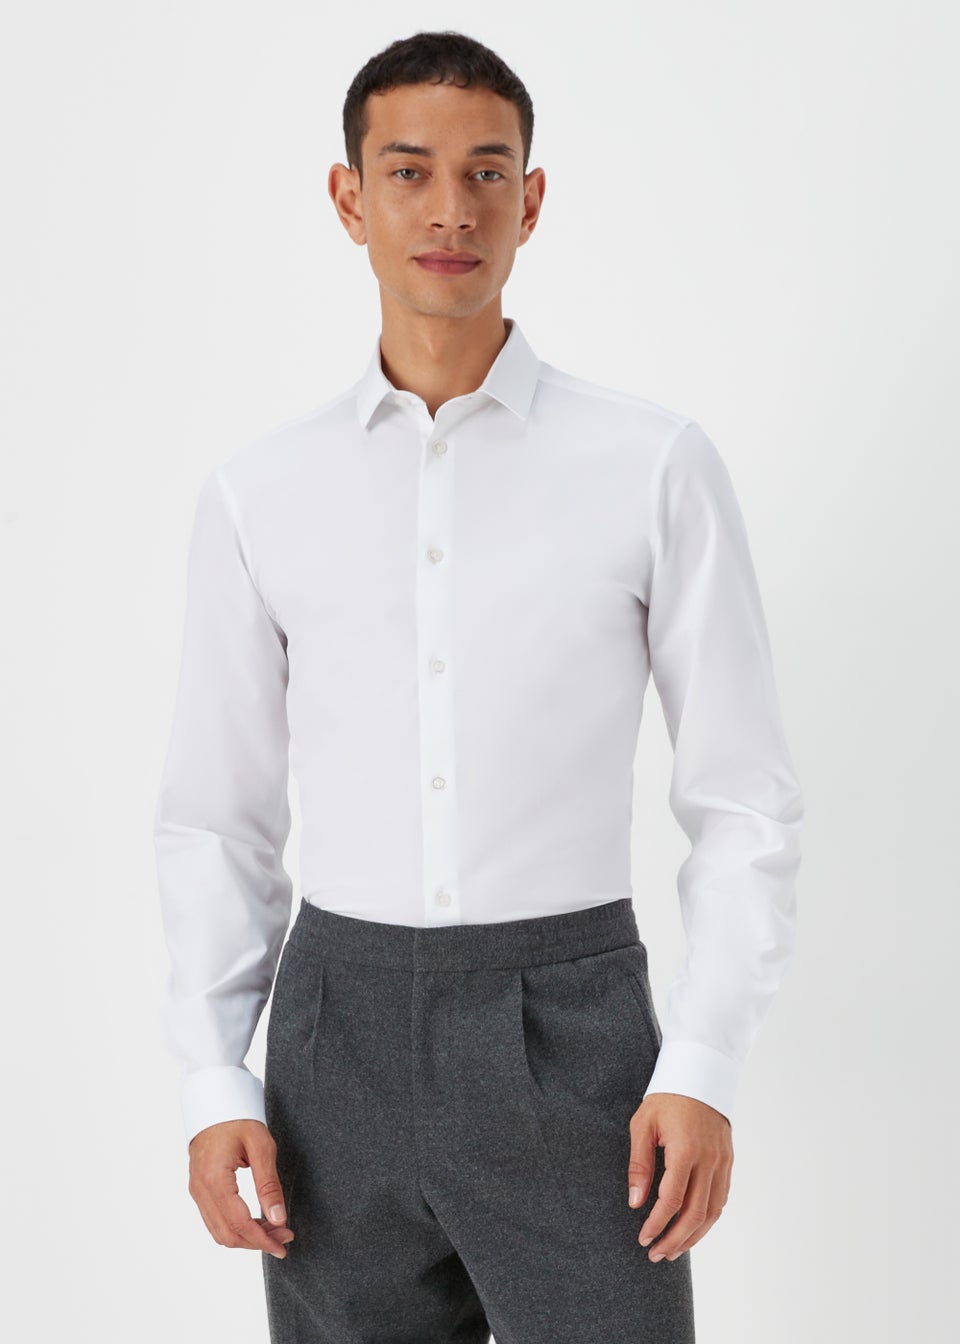 Taylor & Wright White 4 Way Stretch Slim Fit Shirt